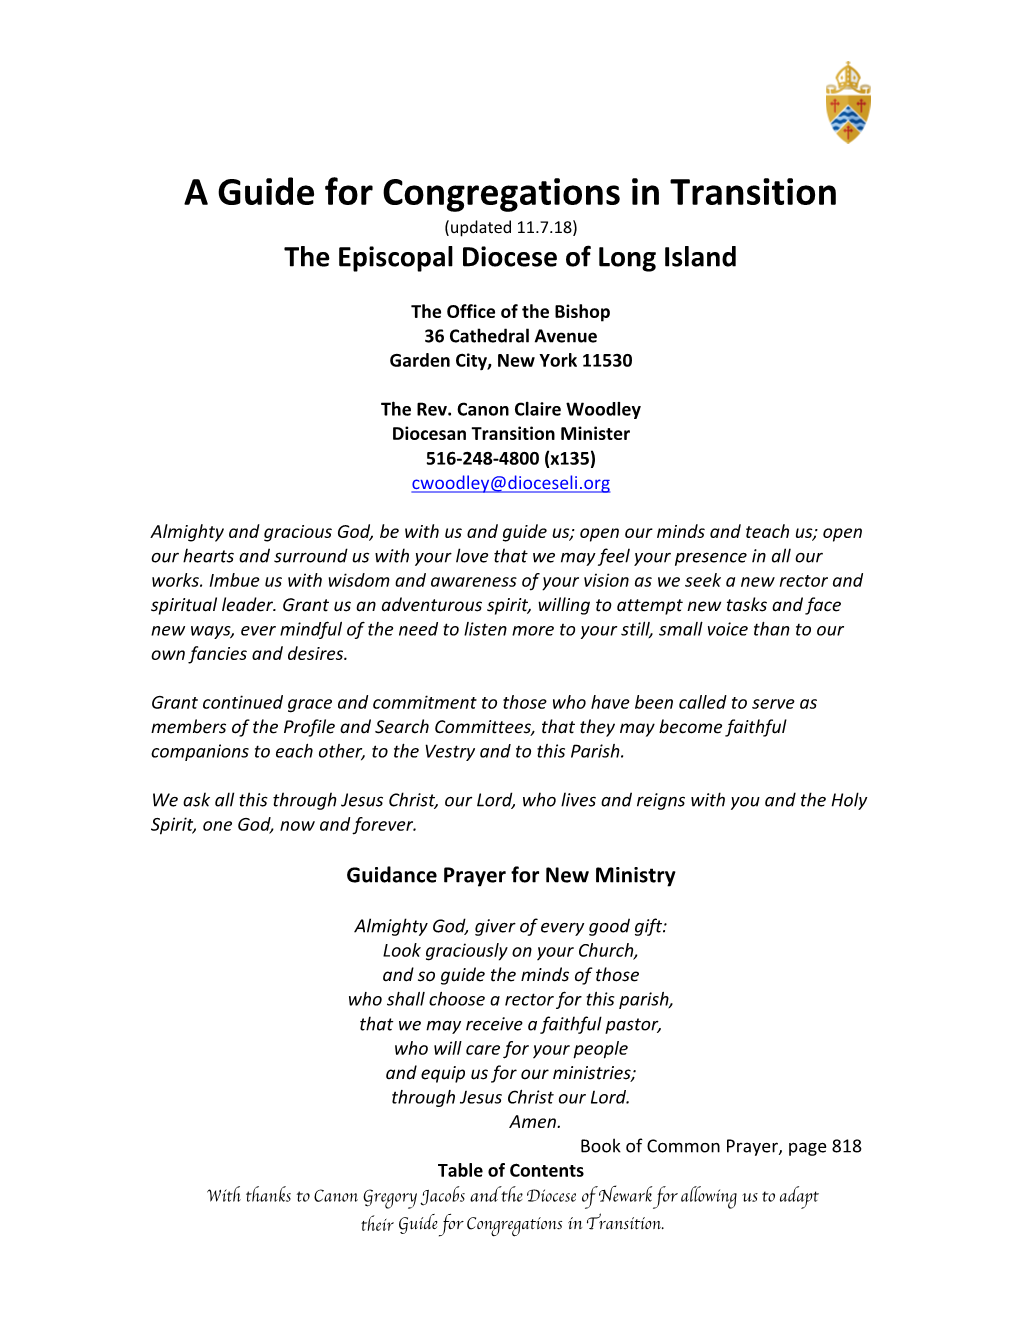 A Guide for Congregations in Transition (Updated 11.7.18) the Episcopal Diocese of Long Island